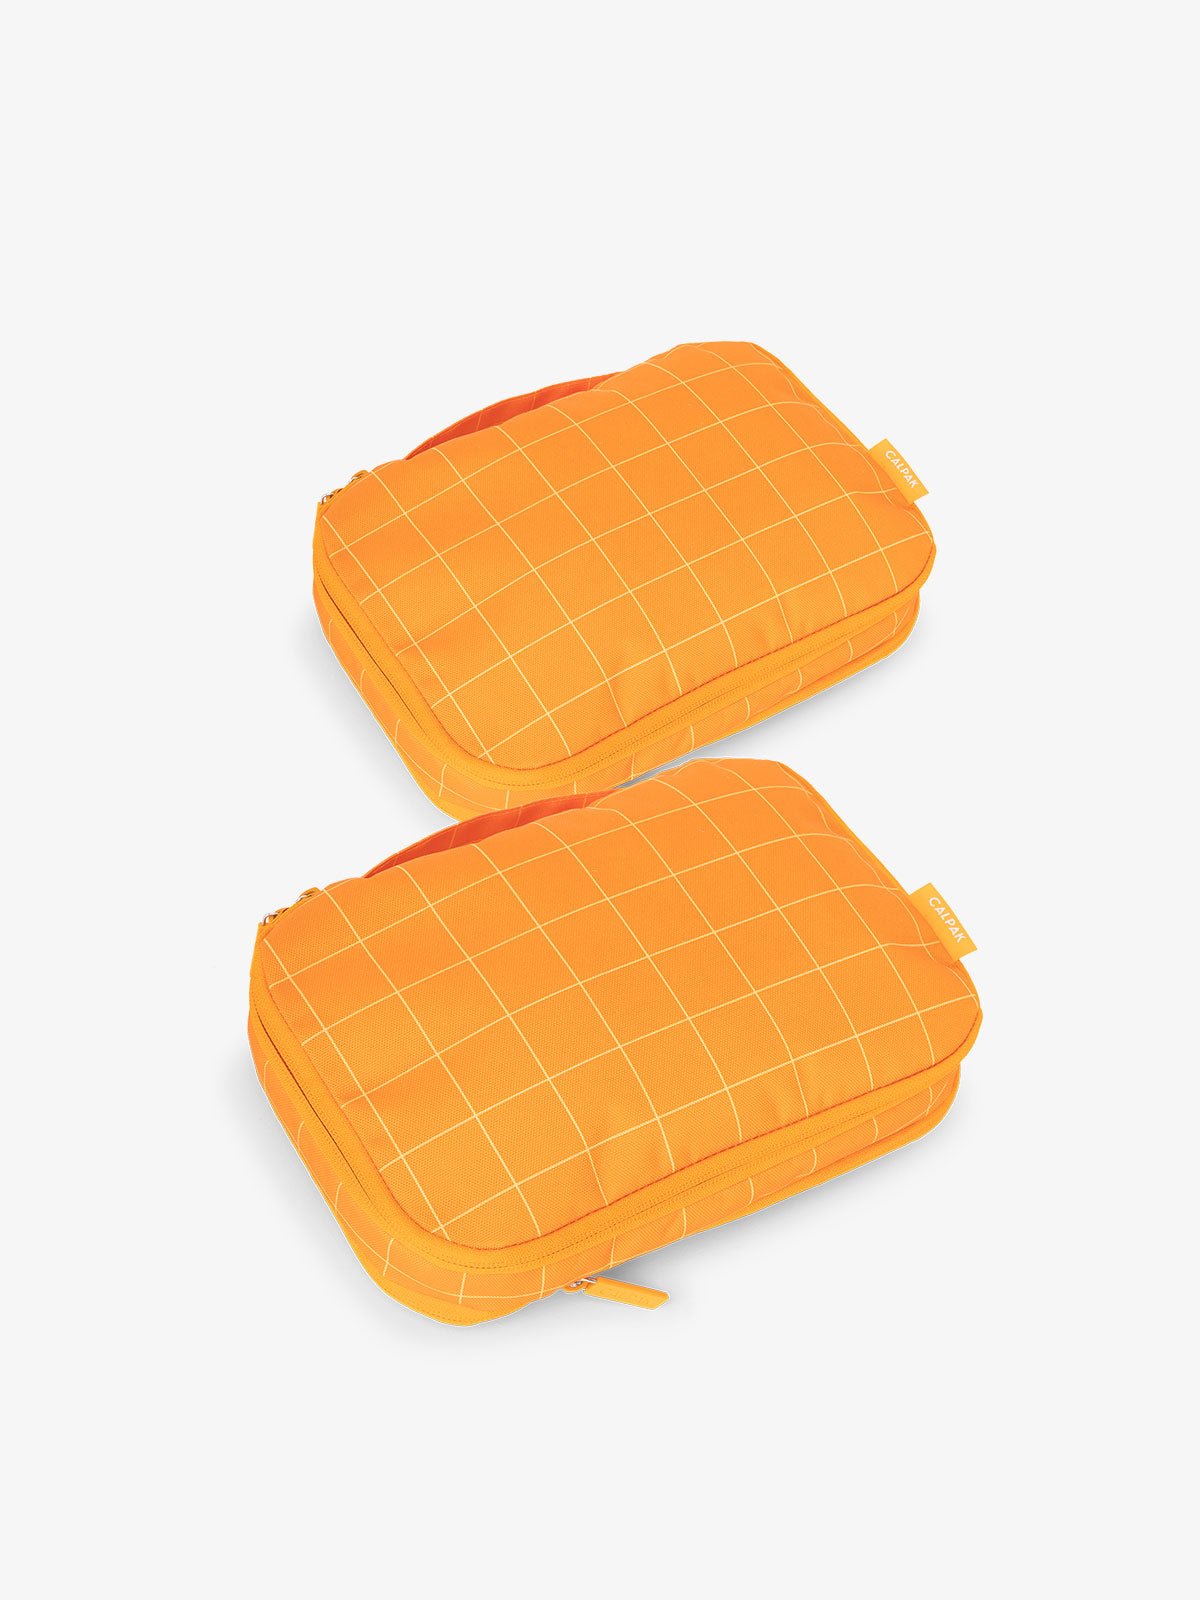 CALPAK small compression packing cubes in orange grid